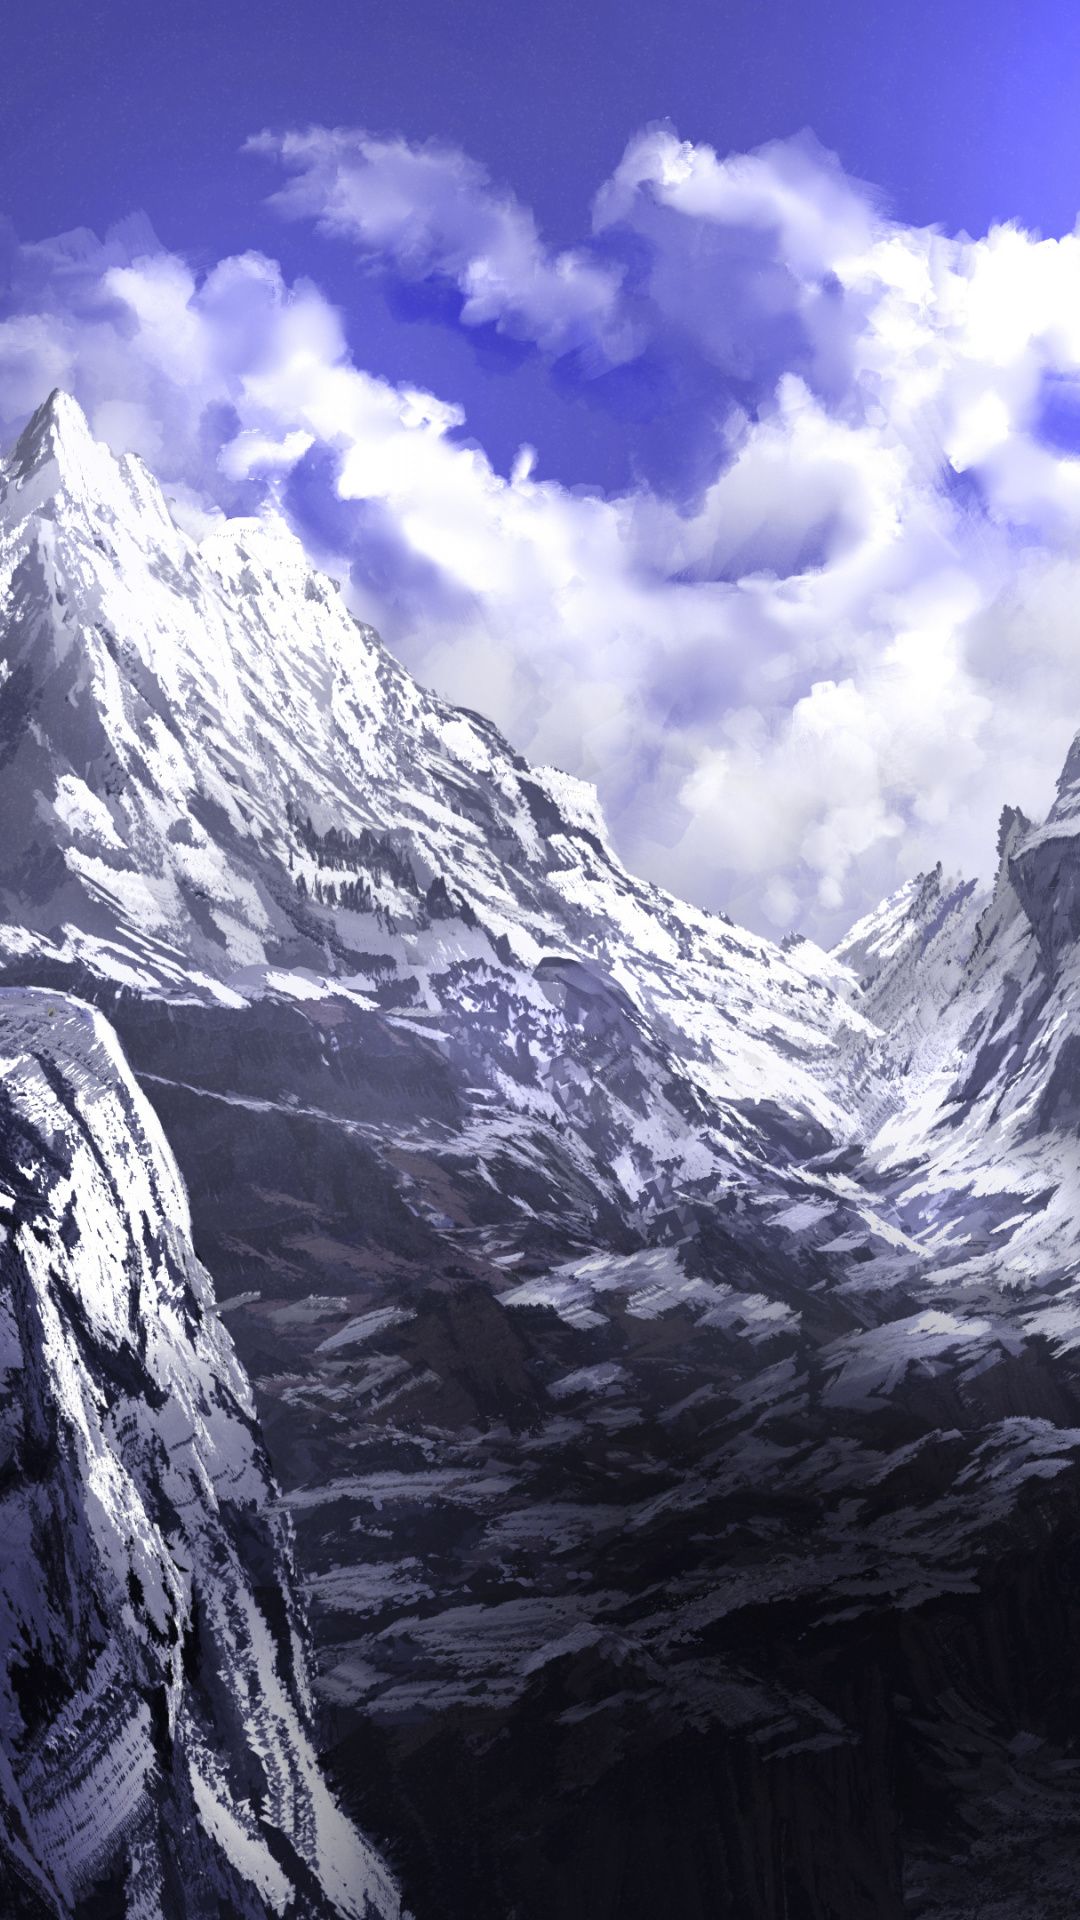 anime mountains and blue image  Anime scenery Fantasy landscape  Scenery wallpaper